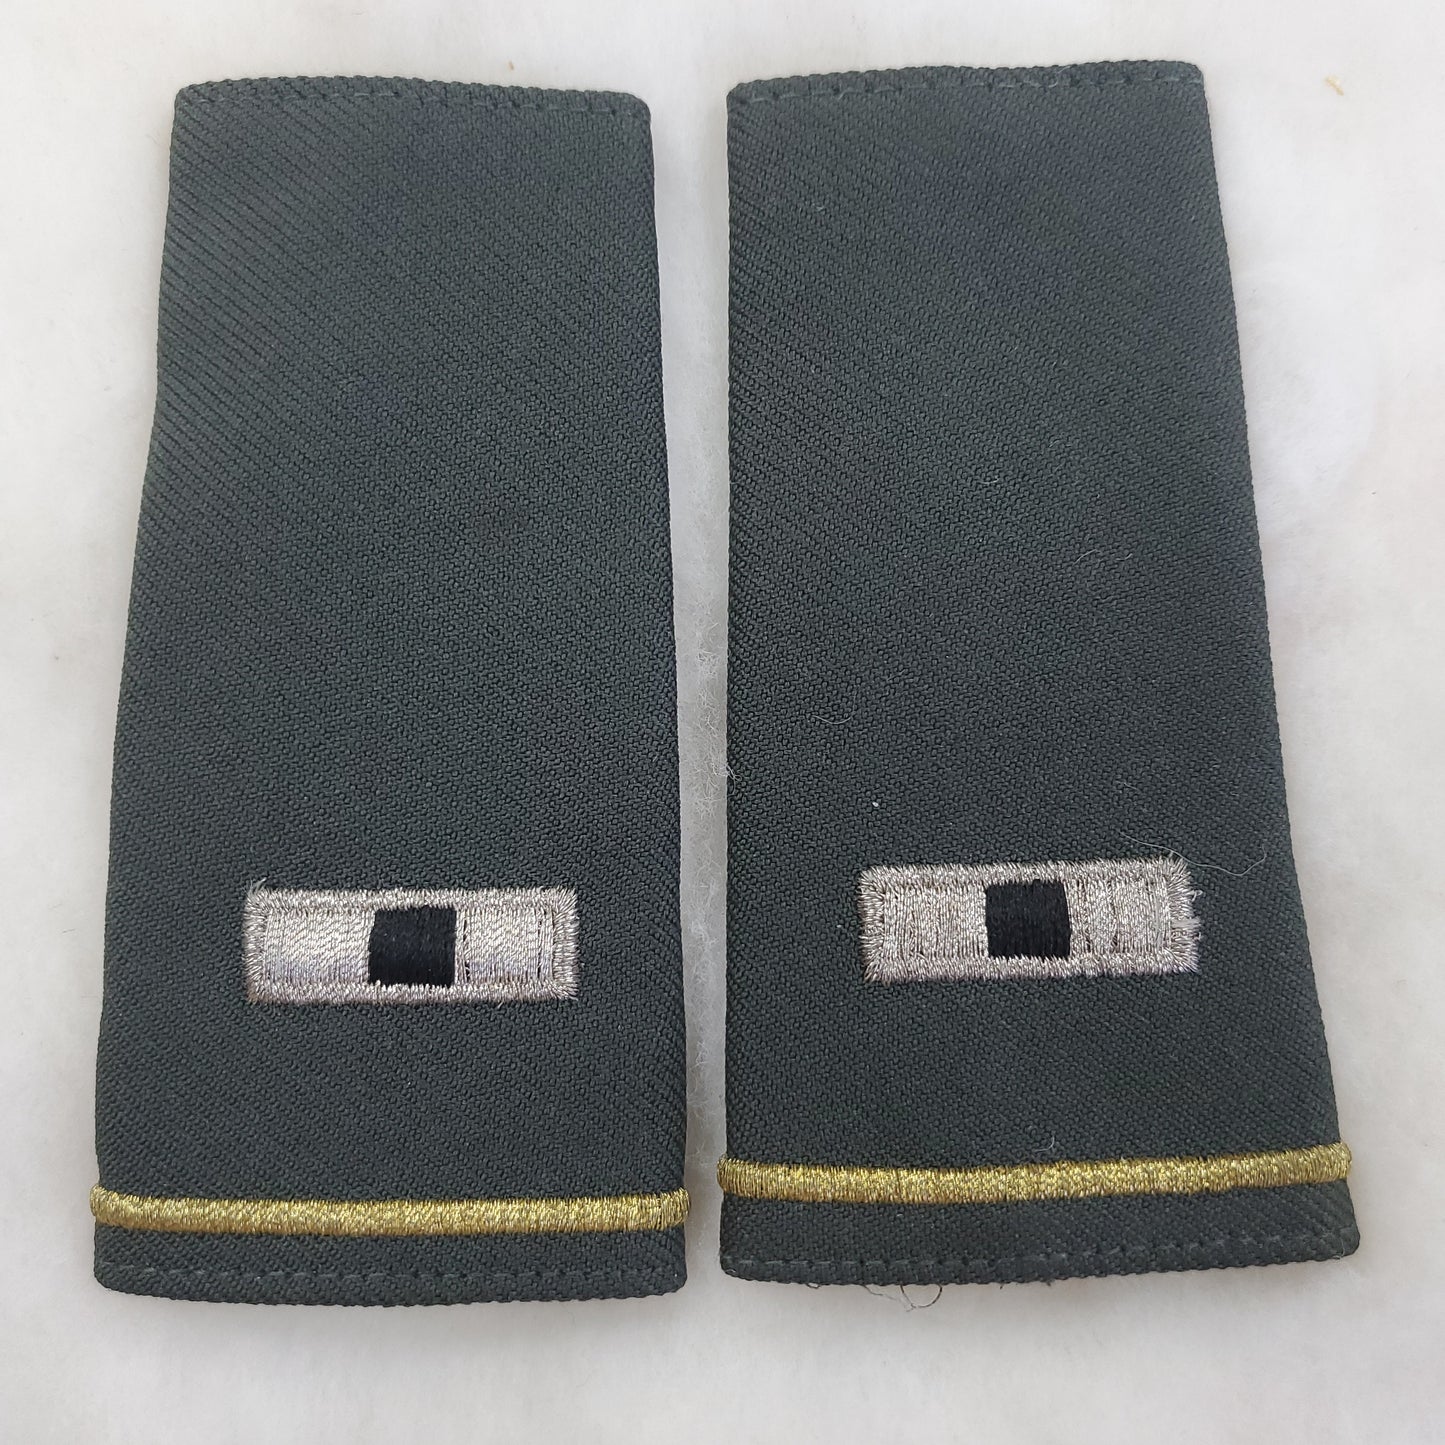 Pair of WWII Warrant Officer Epaulets (M7JW15)